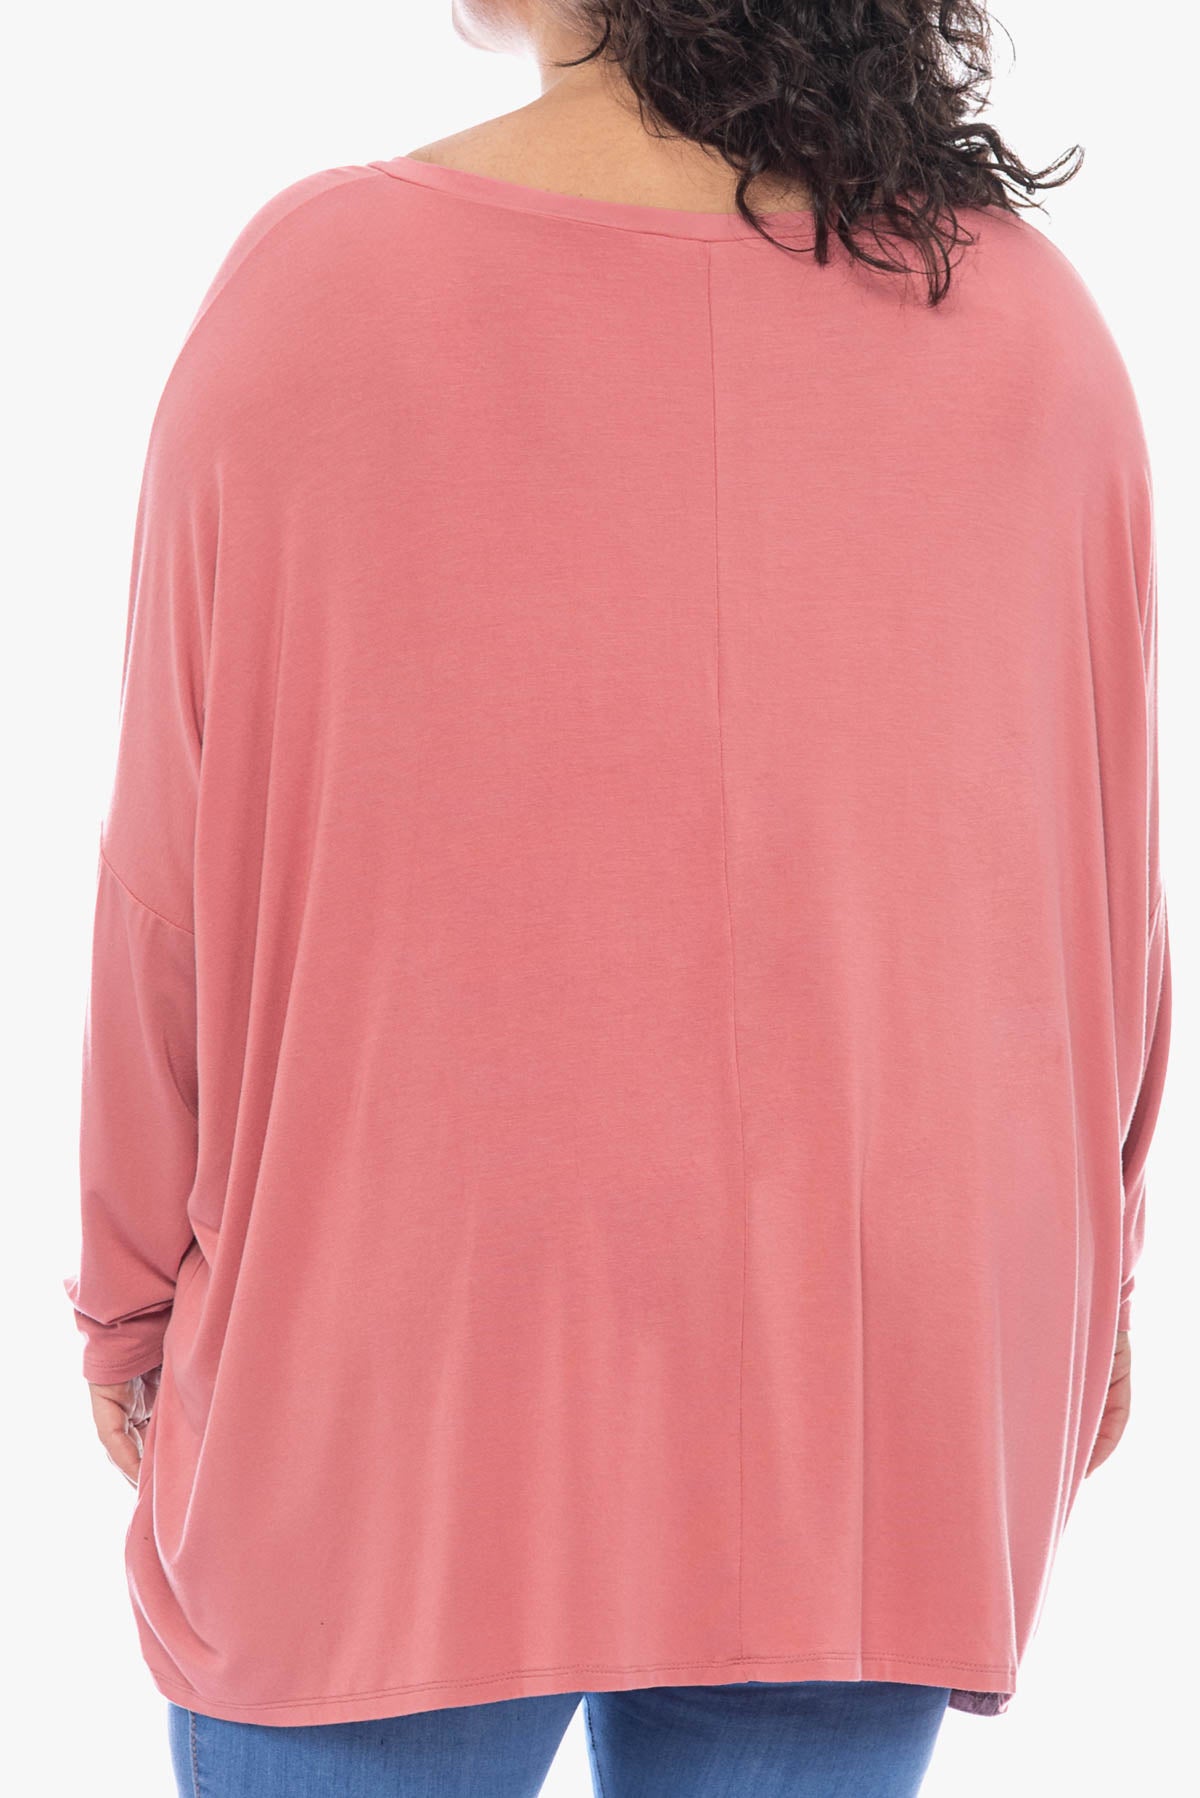 SHAWN V oversized top